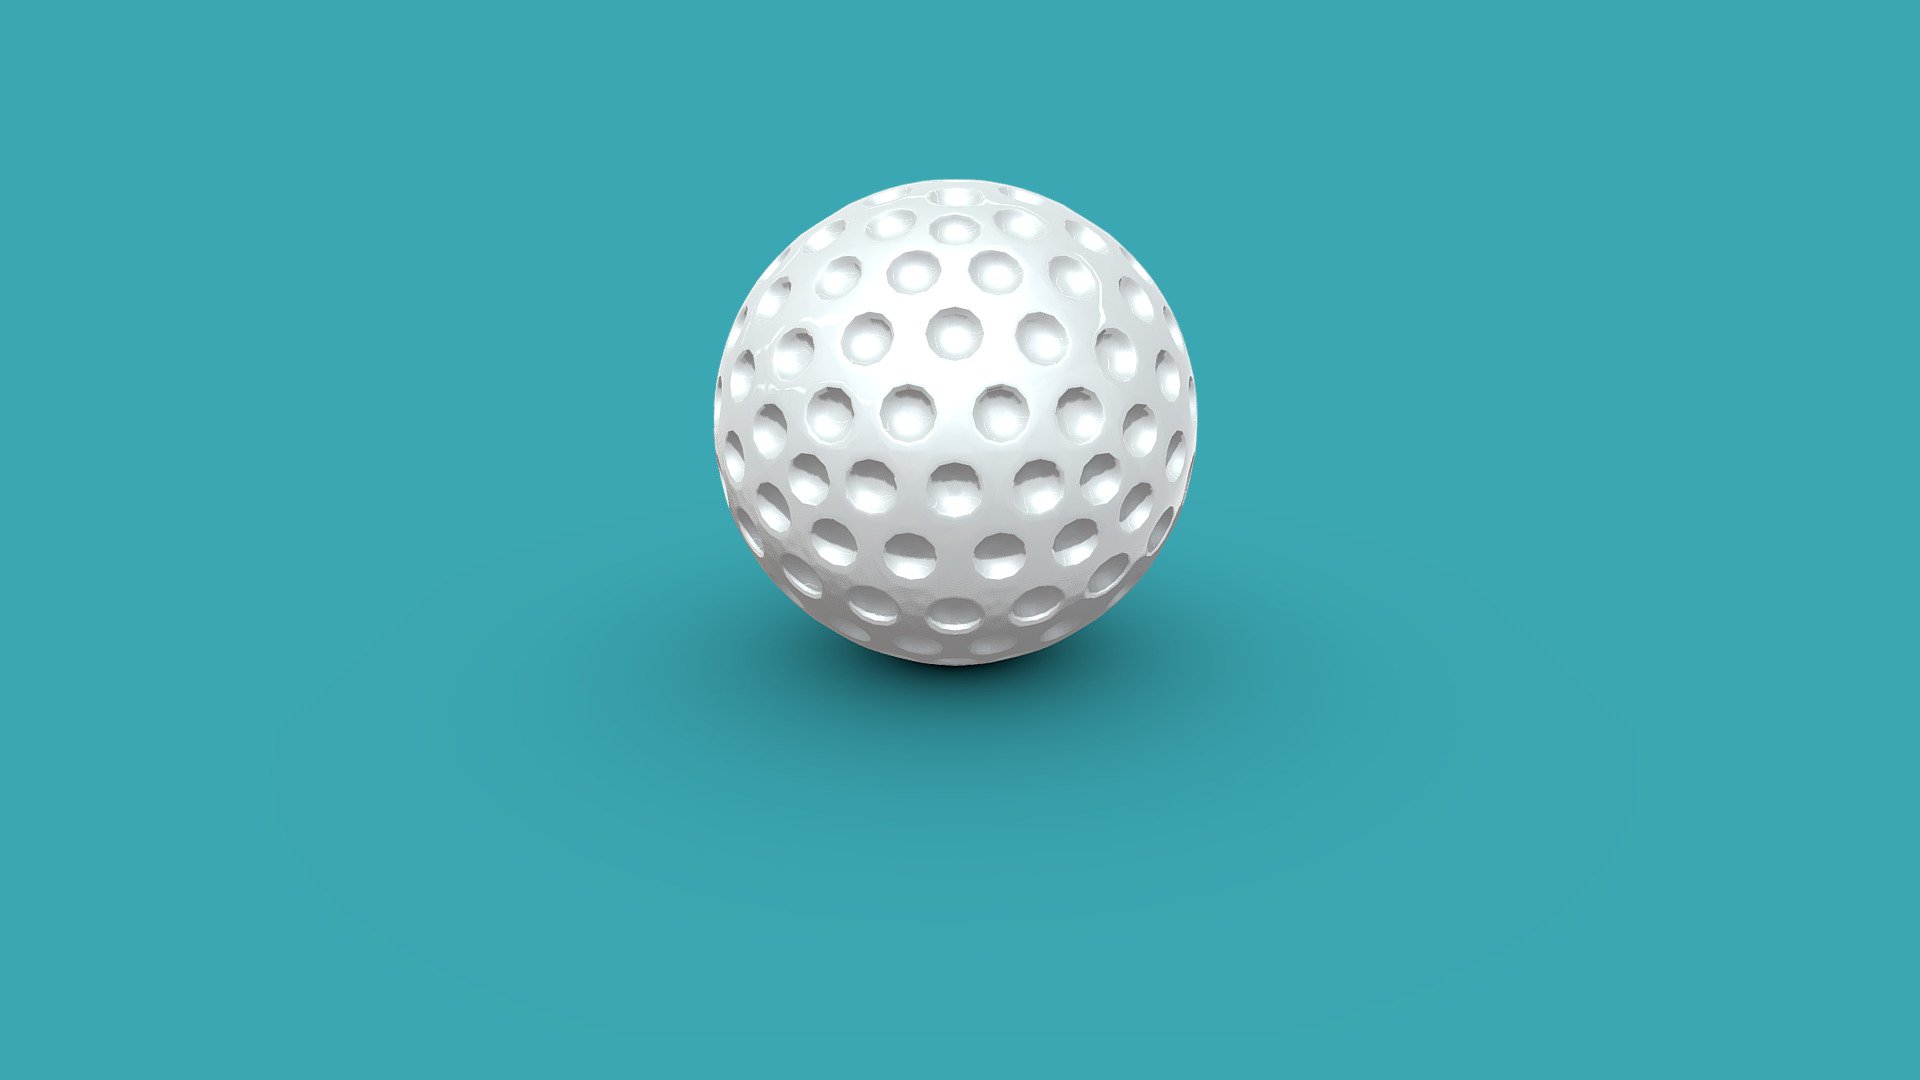 Introducing the Golf Ball 3D model, a high-quality and realistic representation of the essential equipment used in the game of golf. This detailed 3D model captures the intricate dimples and texture of a standard golf ball, making it a perfect choice for golf-themed projects, sports visualizations, or product showcases.

The Golf Ball 3D model showcases the spherical shape and detailed surface of a typical golf ball, featuring realistic materials and lighting effects to enhance its visual appeal. Whether you're creating a golf simulation, designing sports visuals, or crafting promotional materials for golf-related products, this 3D model offers the accuracy and realism you need.

Elevate your golf-themed projects with the Golf Ball 3D model, providing a lifelike representation of this iconic sports accessory. Download this versatile 3D model today to enhance your visual content and bring the elegance of golf to life.


GolfBall #SportsEquipment #3DModel #Golf #SportsVisuals #ProductShowcase #GolfSimulation - Golf Ball - Buy Royalty Free 3D model by Sujit Mishra (@sujitanshumishra) 3d model